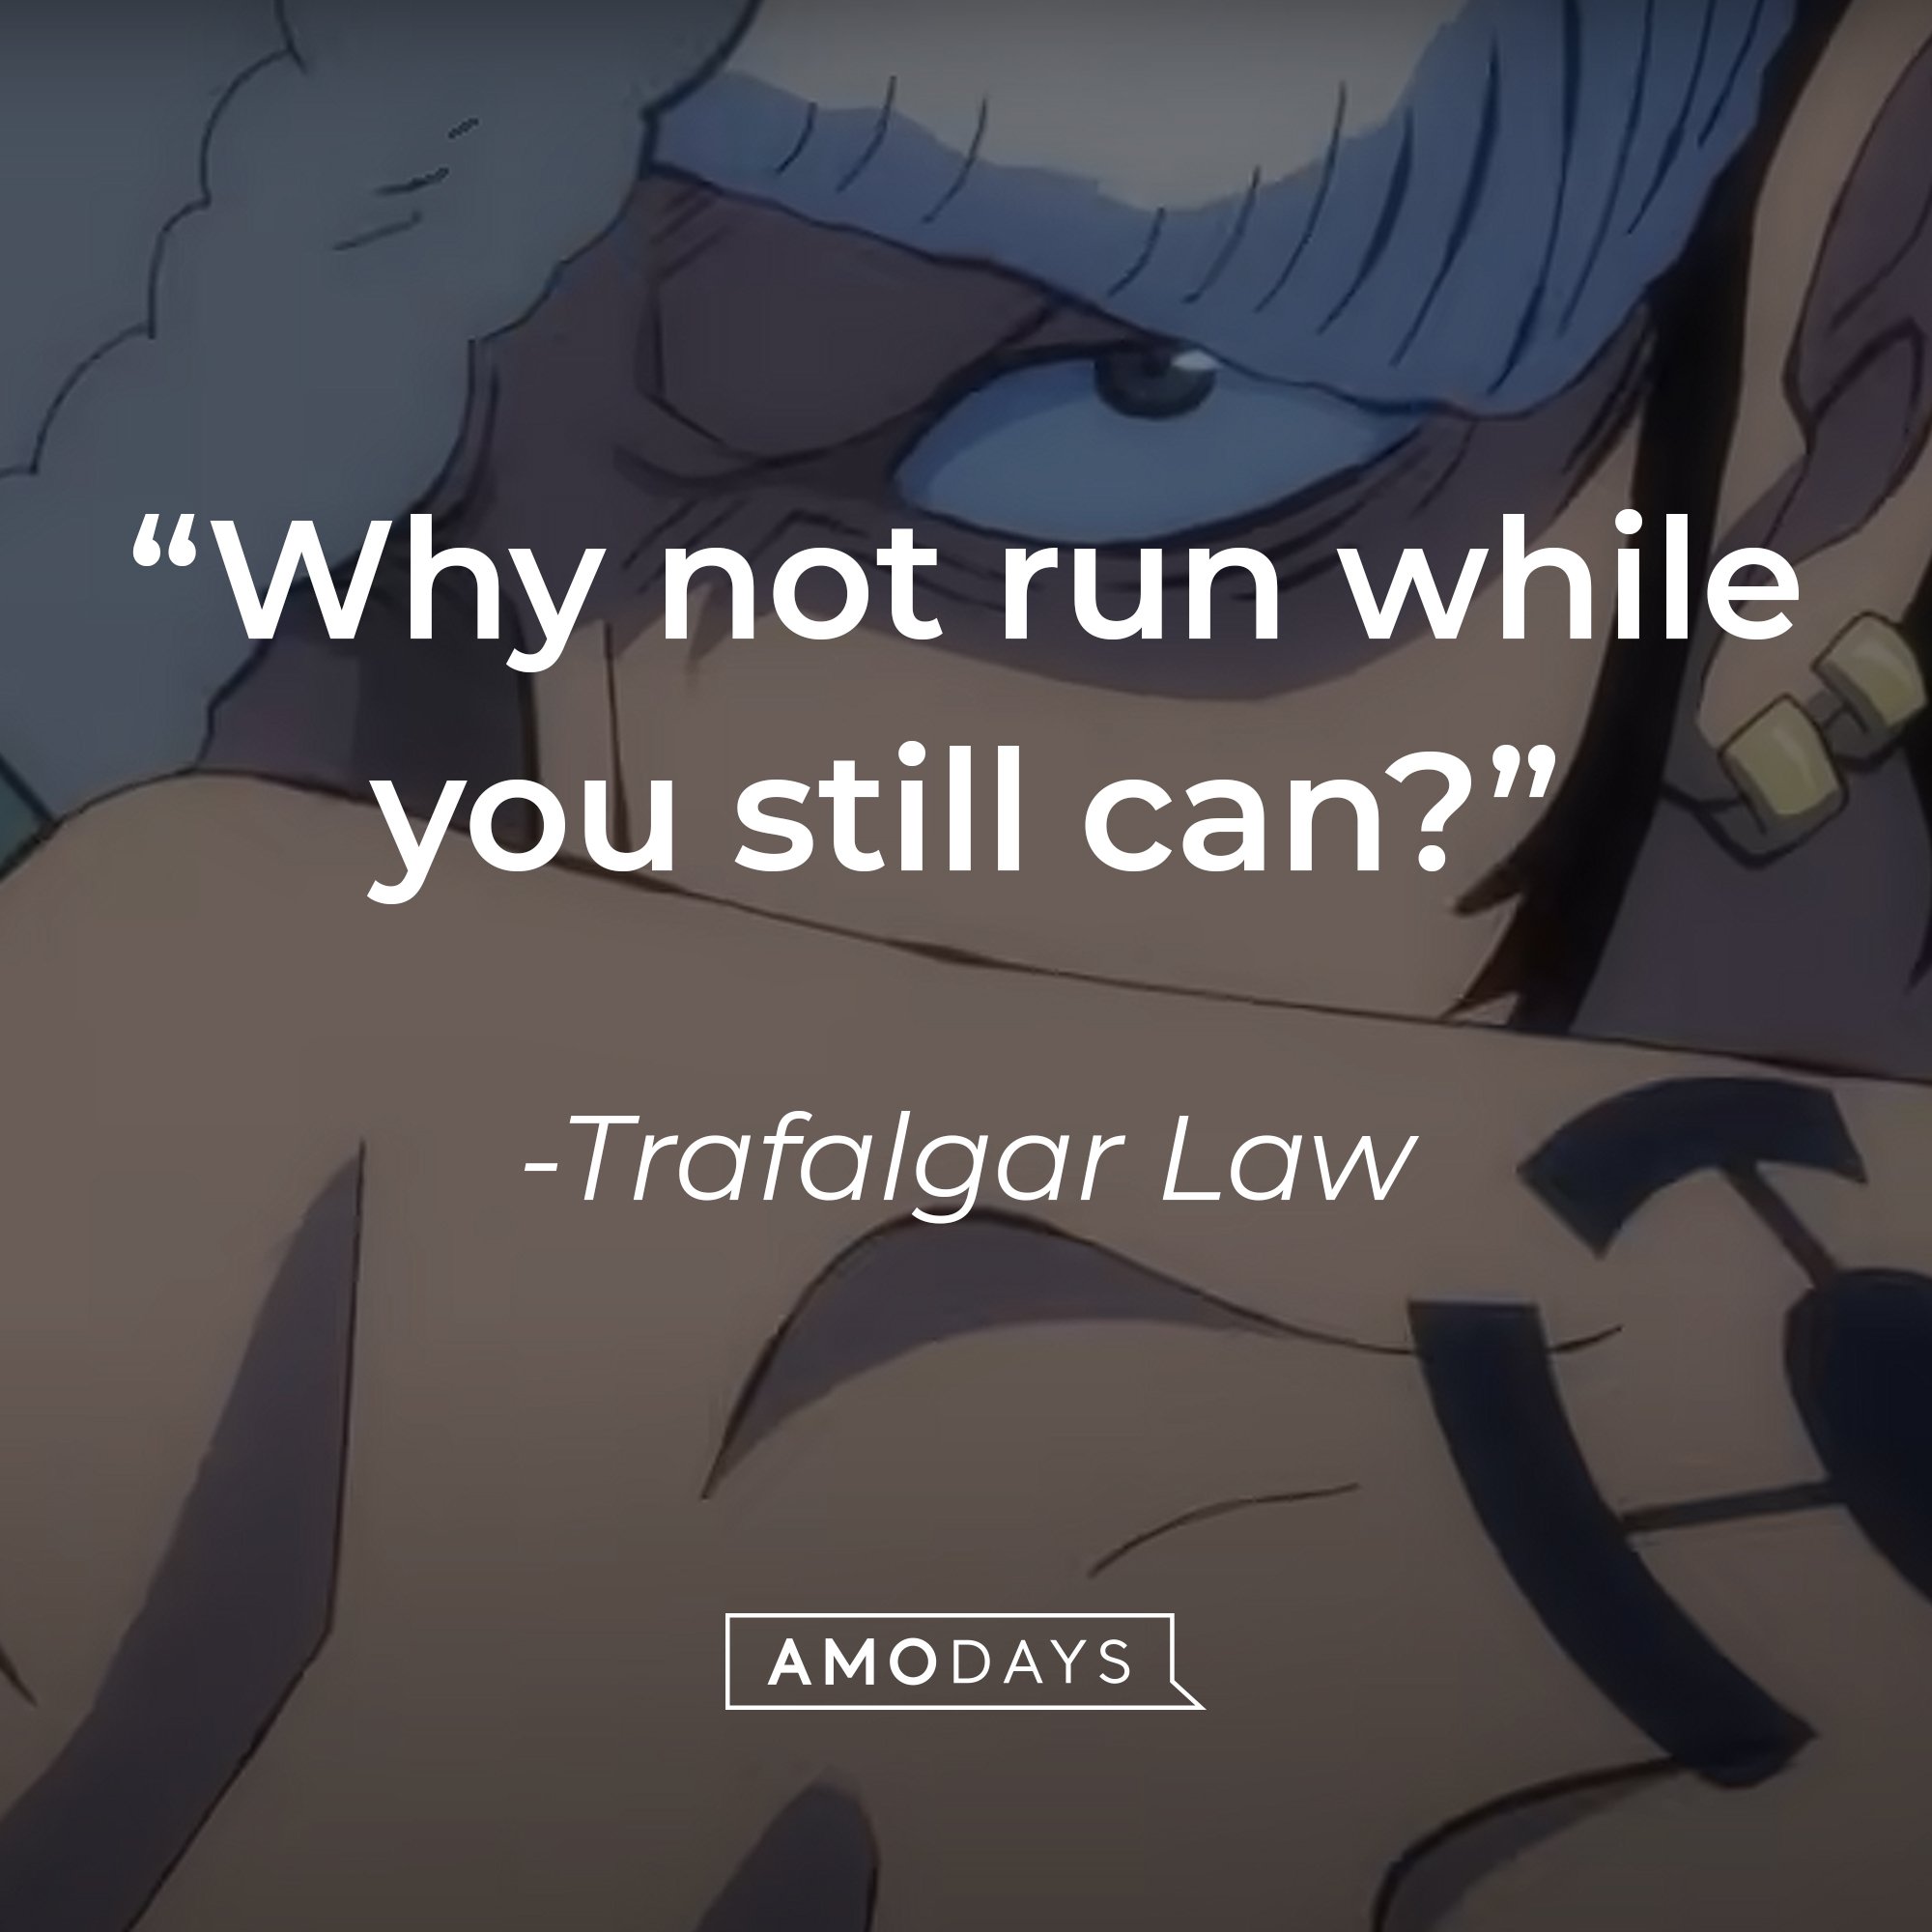 Trafalgar Law’s quote: "Why not run while you still can?" | Image: AmoDays